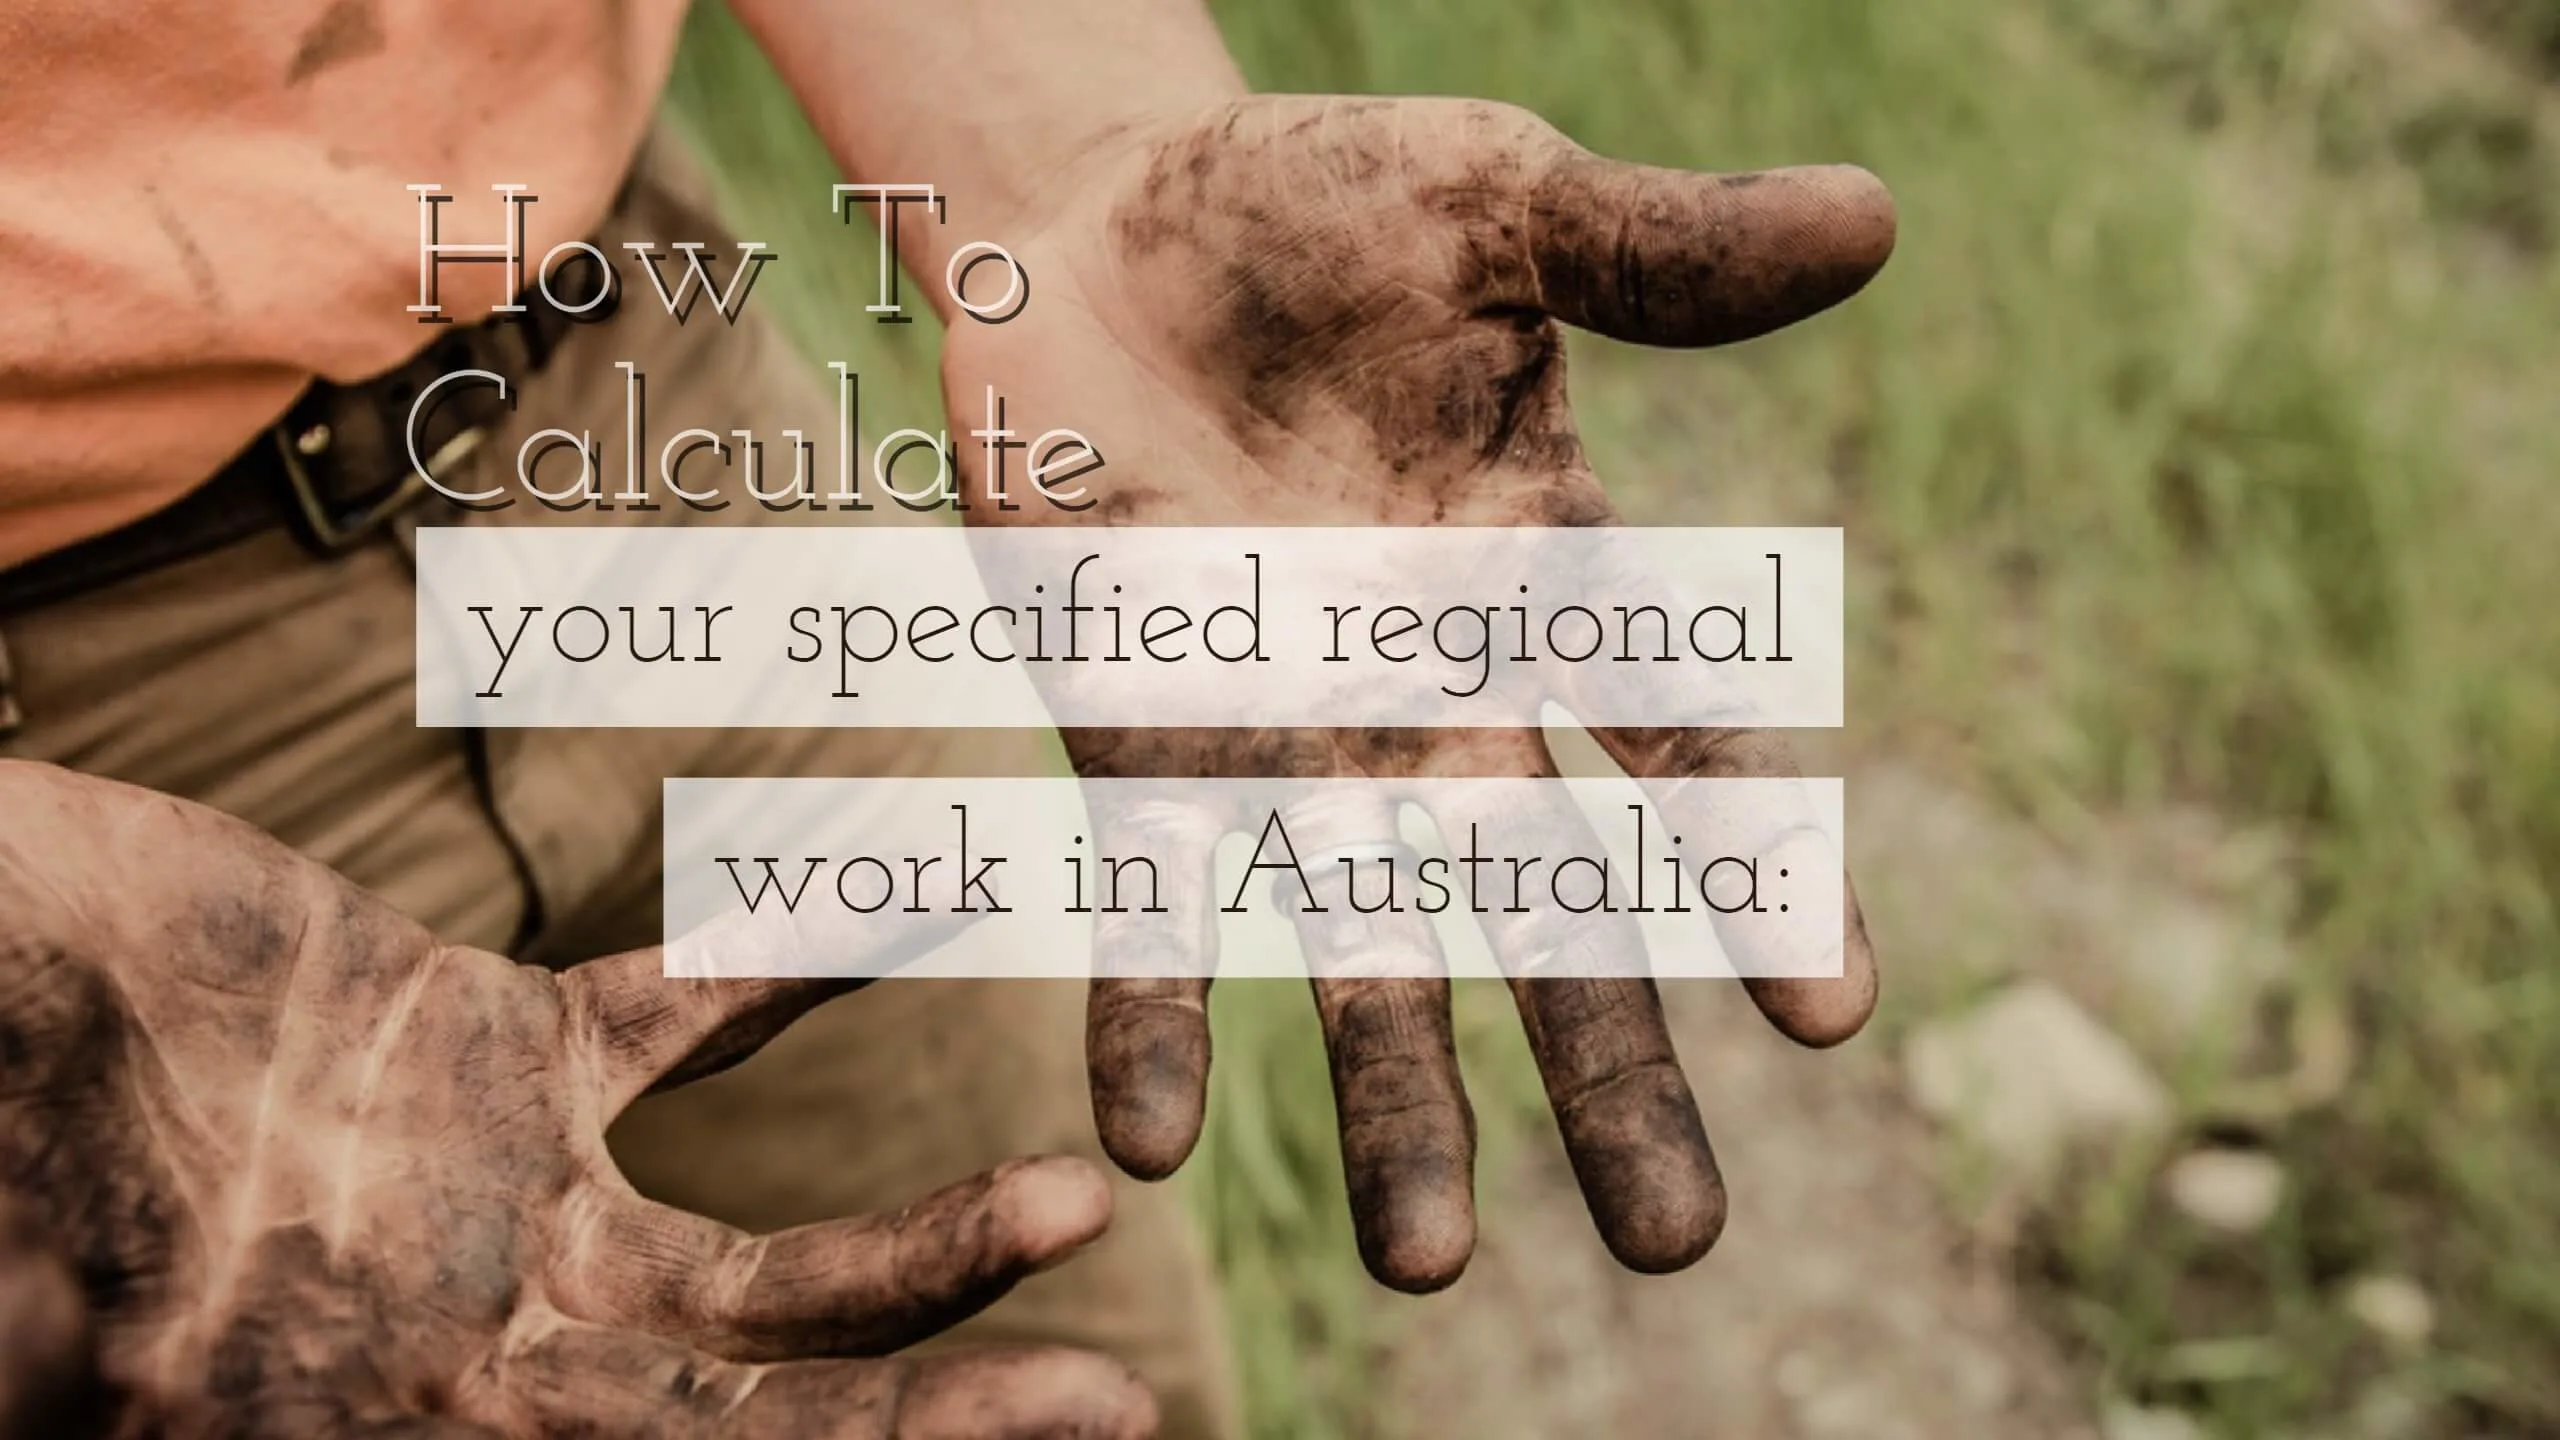 How do you calculate your regional work in Australia